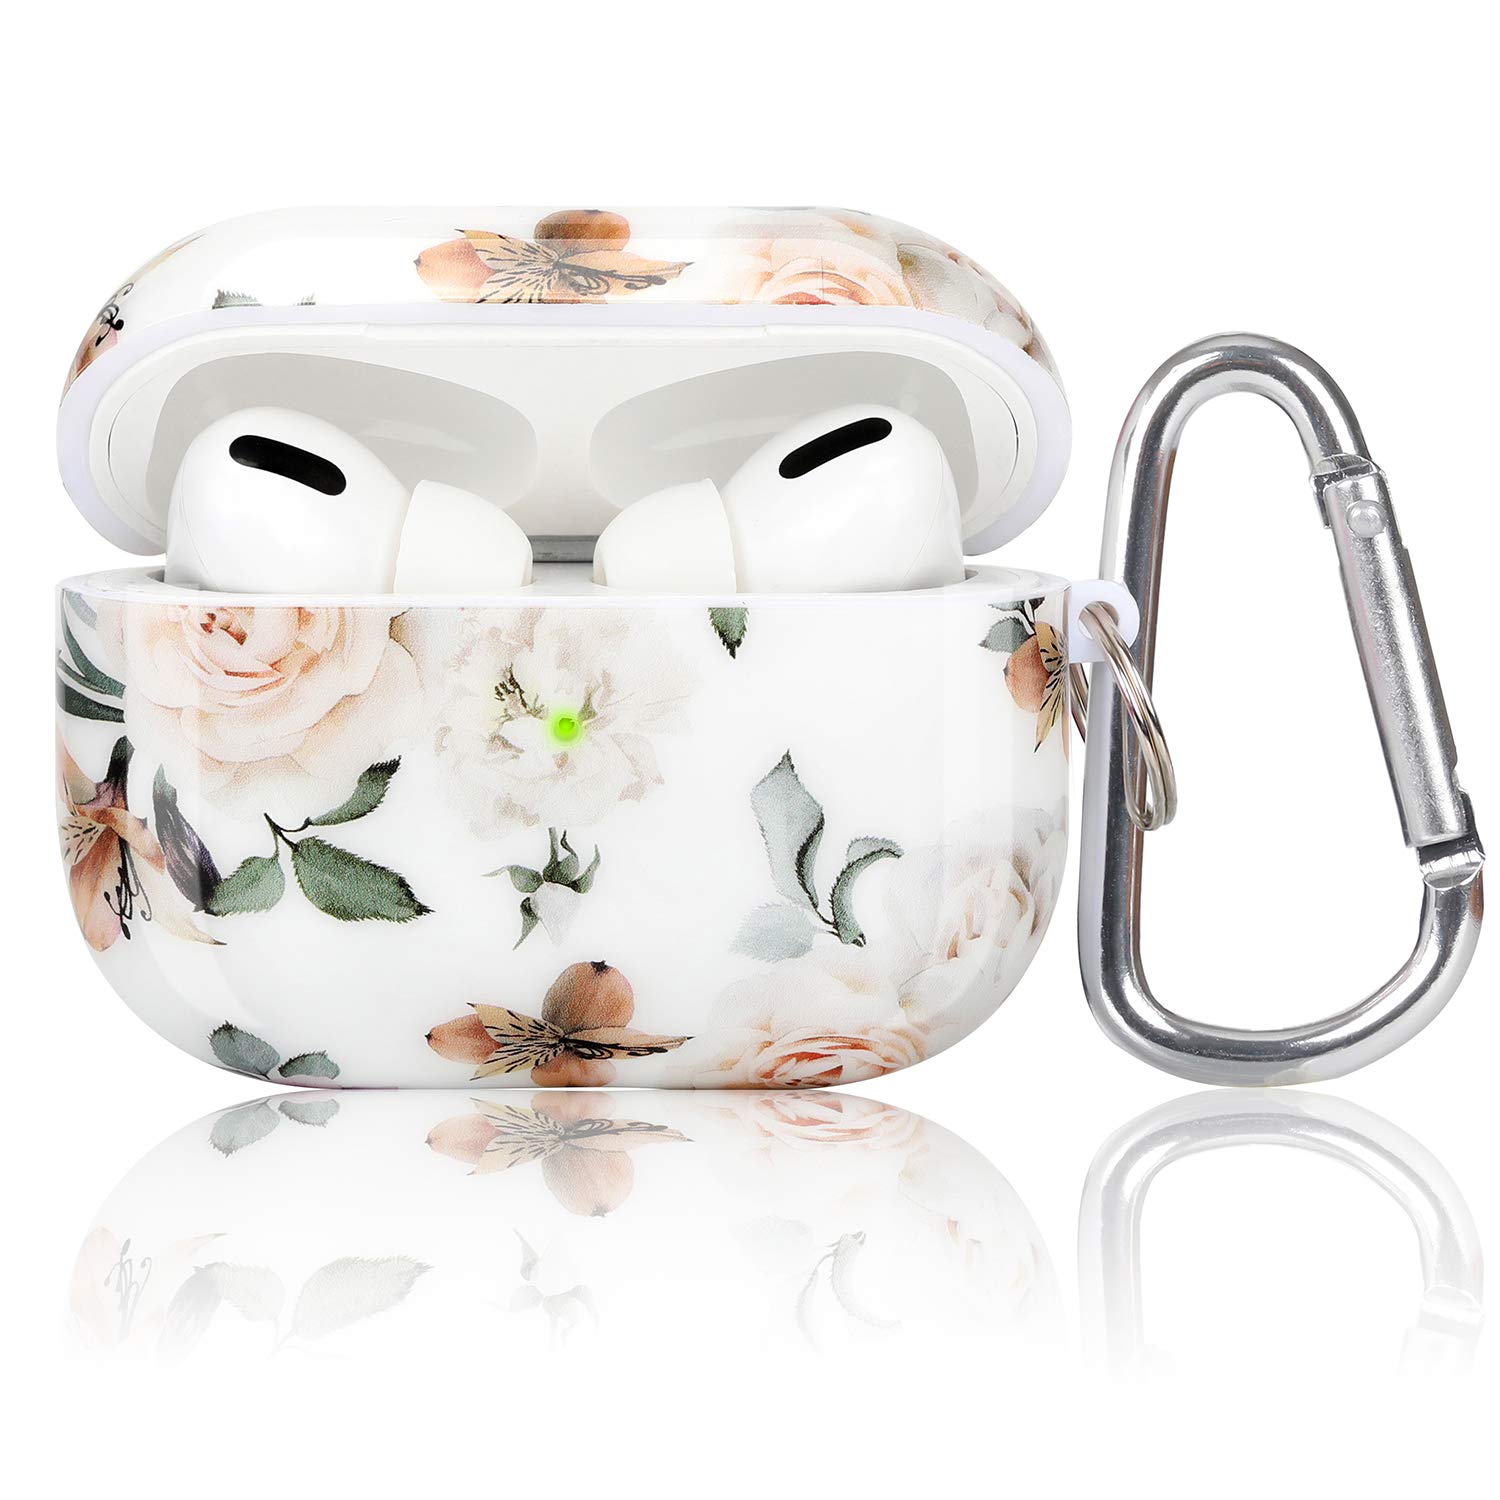 Apple Airpod Pro Case - Cute Flowers & Boho Floral Design Protective Shockproof Silicone Cover With Keychain Option - Supports Wireless Qi Charging for Airpods Pro Generation 1 - White Rose